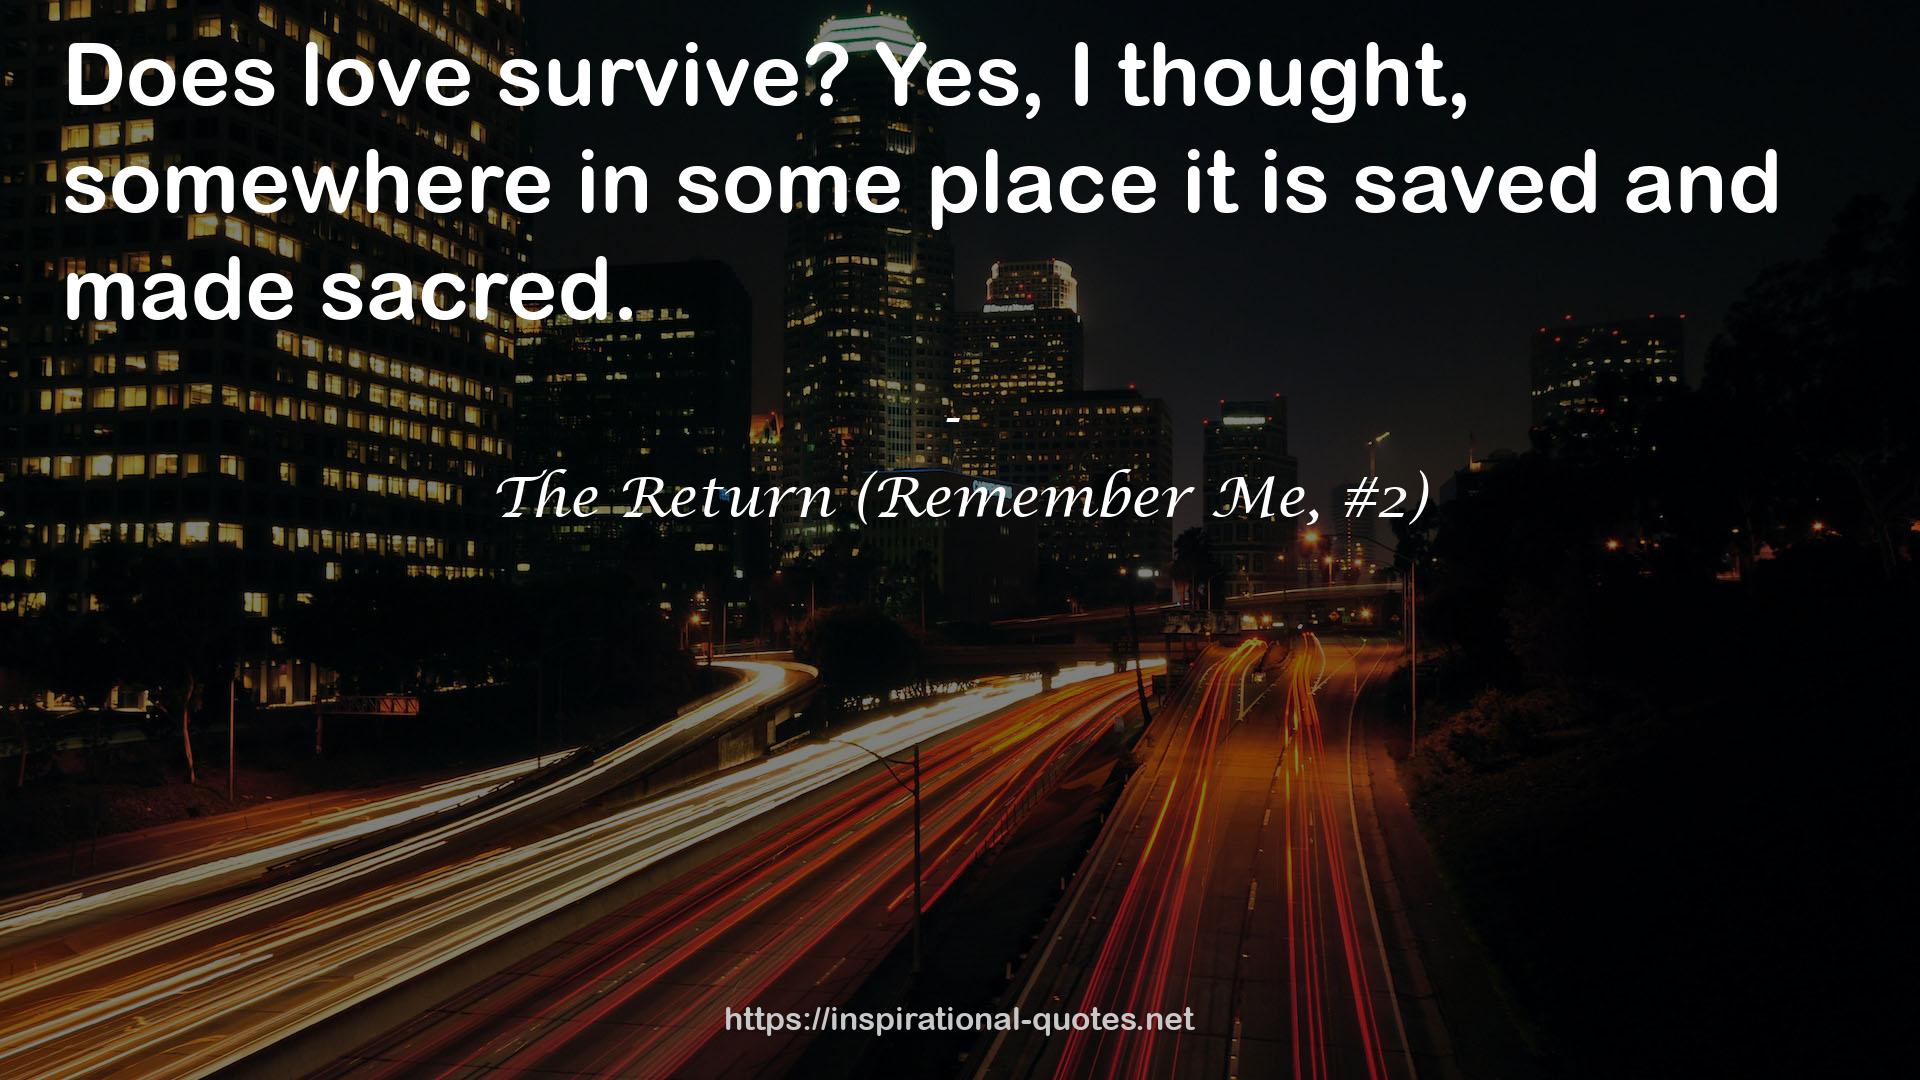 The Return (Remember Me, #2) QUOTES